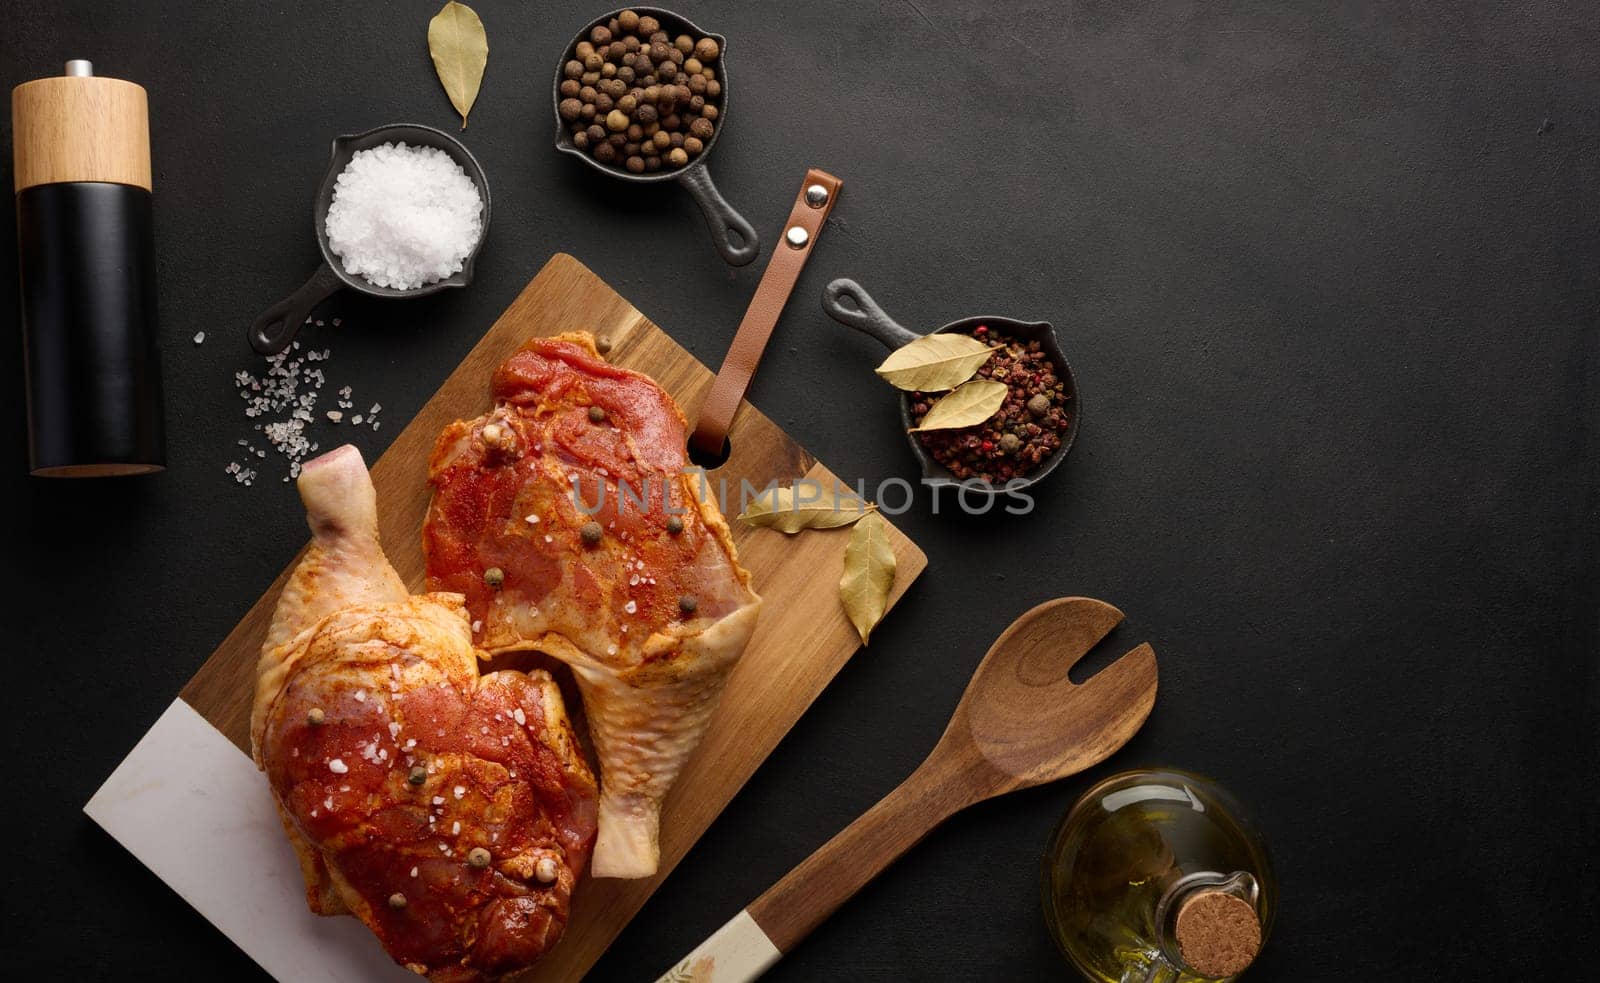 Raw chicken drumsticks seasoned on a wooden board, accompanied by salt and peppercorns, viewed from the top by ndanko